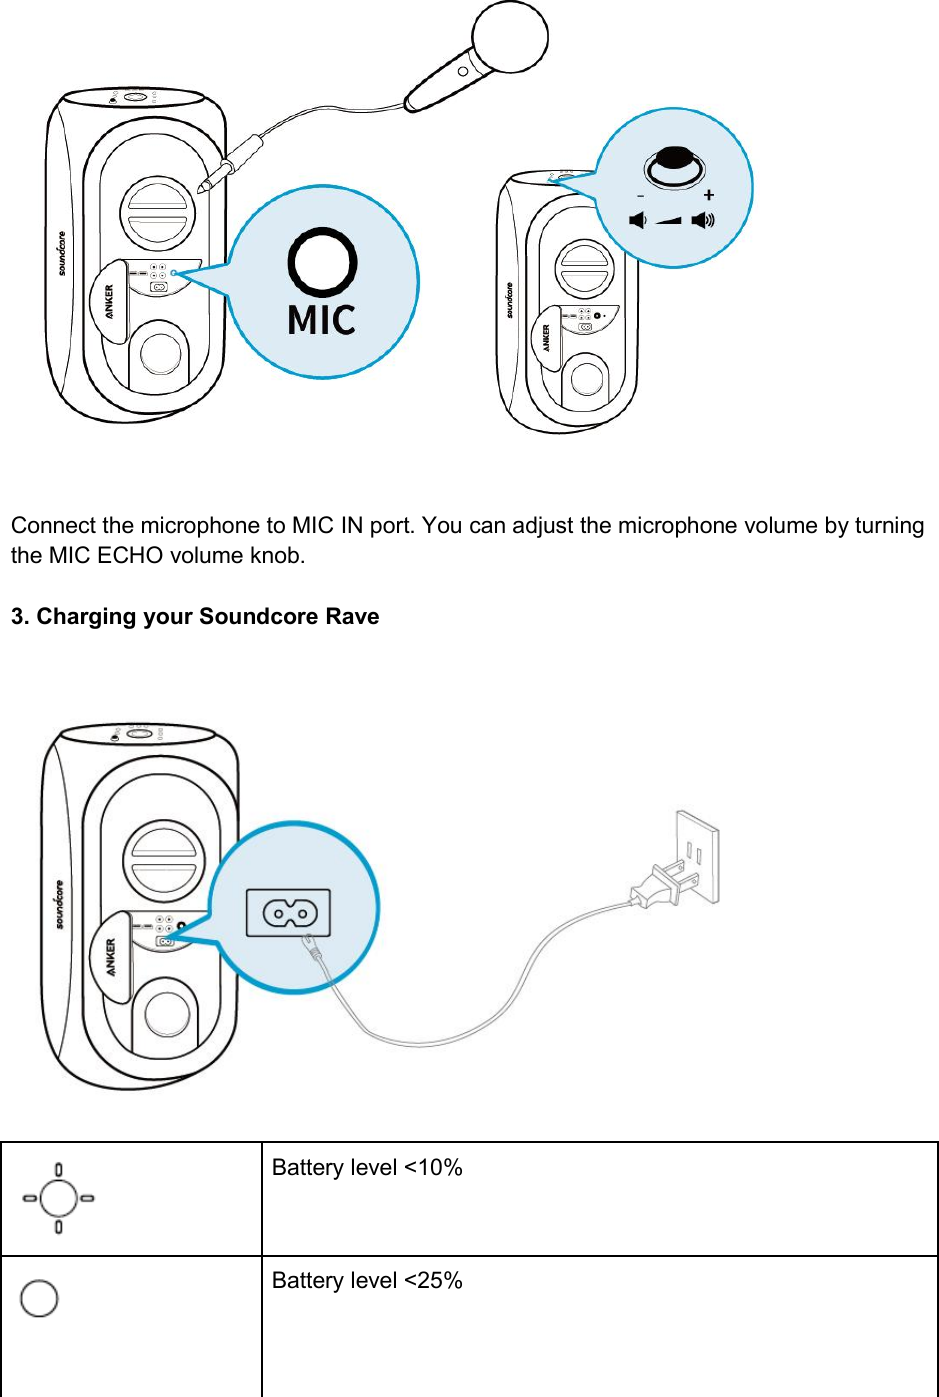 Connect the microphone to MIC IN port. You can adjust the microphone volume by turningthe MIC ECHO volume knob.3. Charging your Soundcore RaveBattery level &lt;10%Battery level &lt;25%